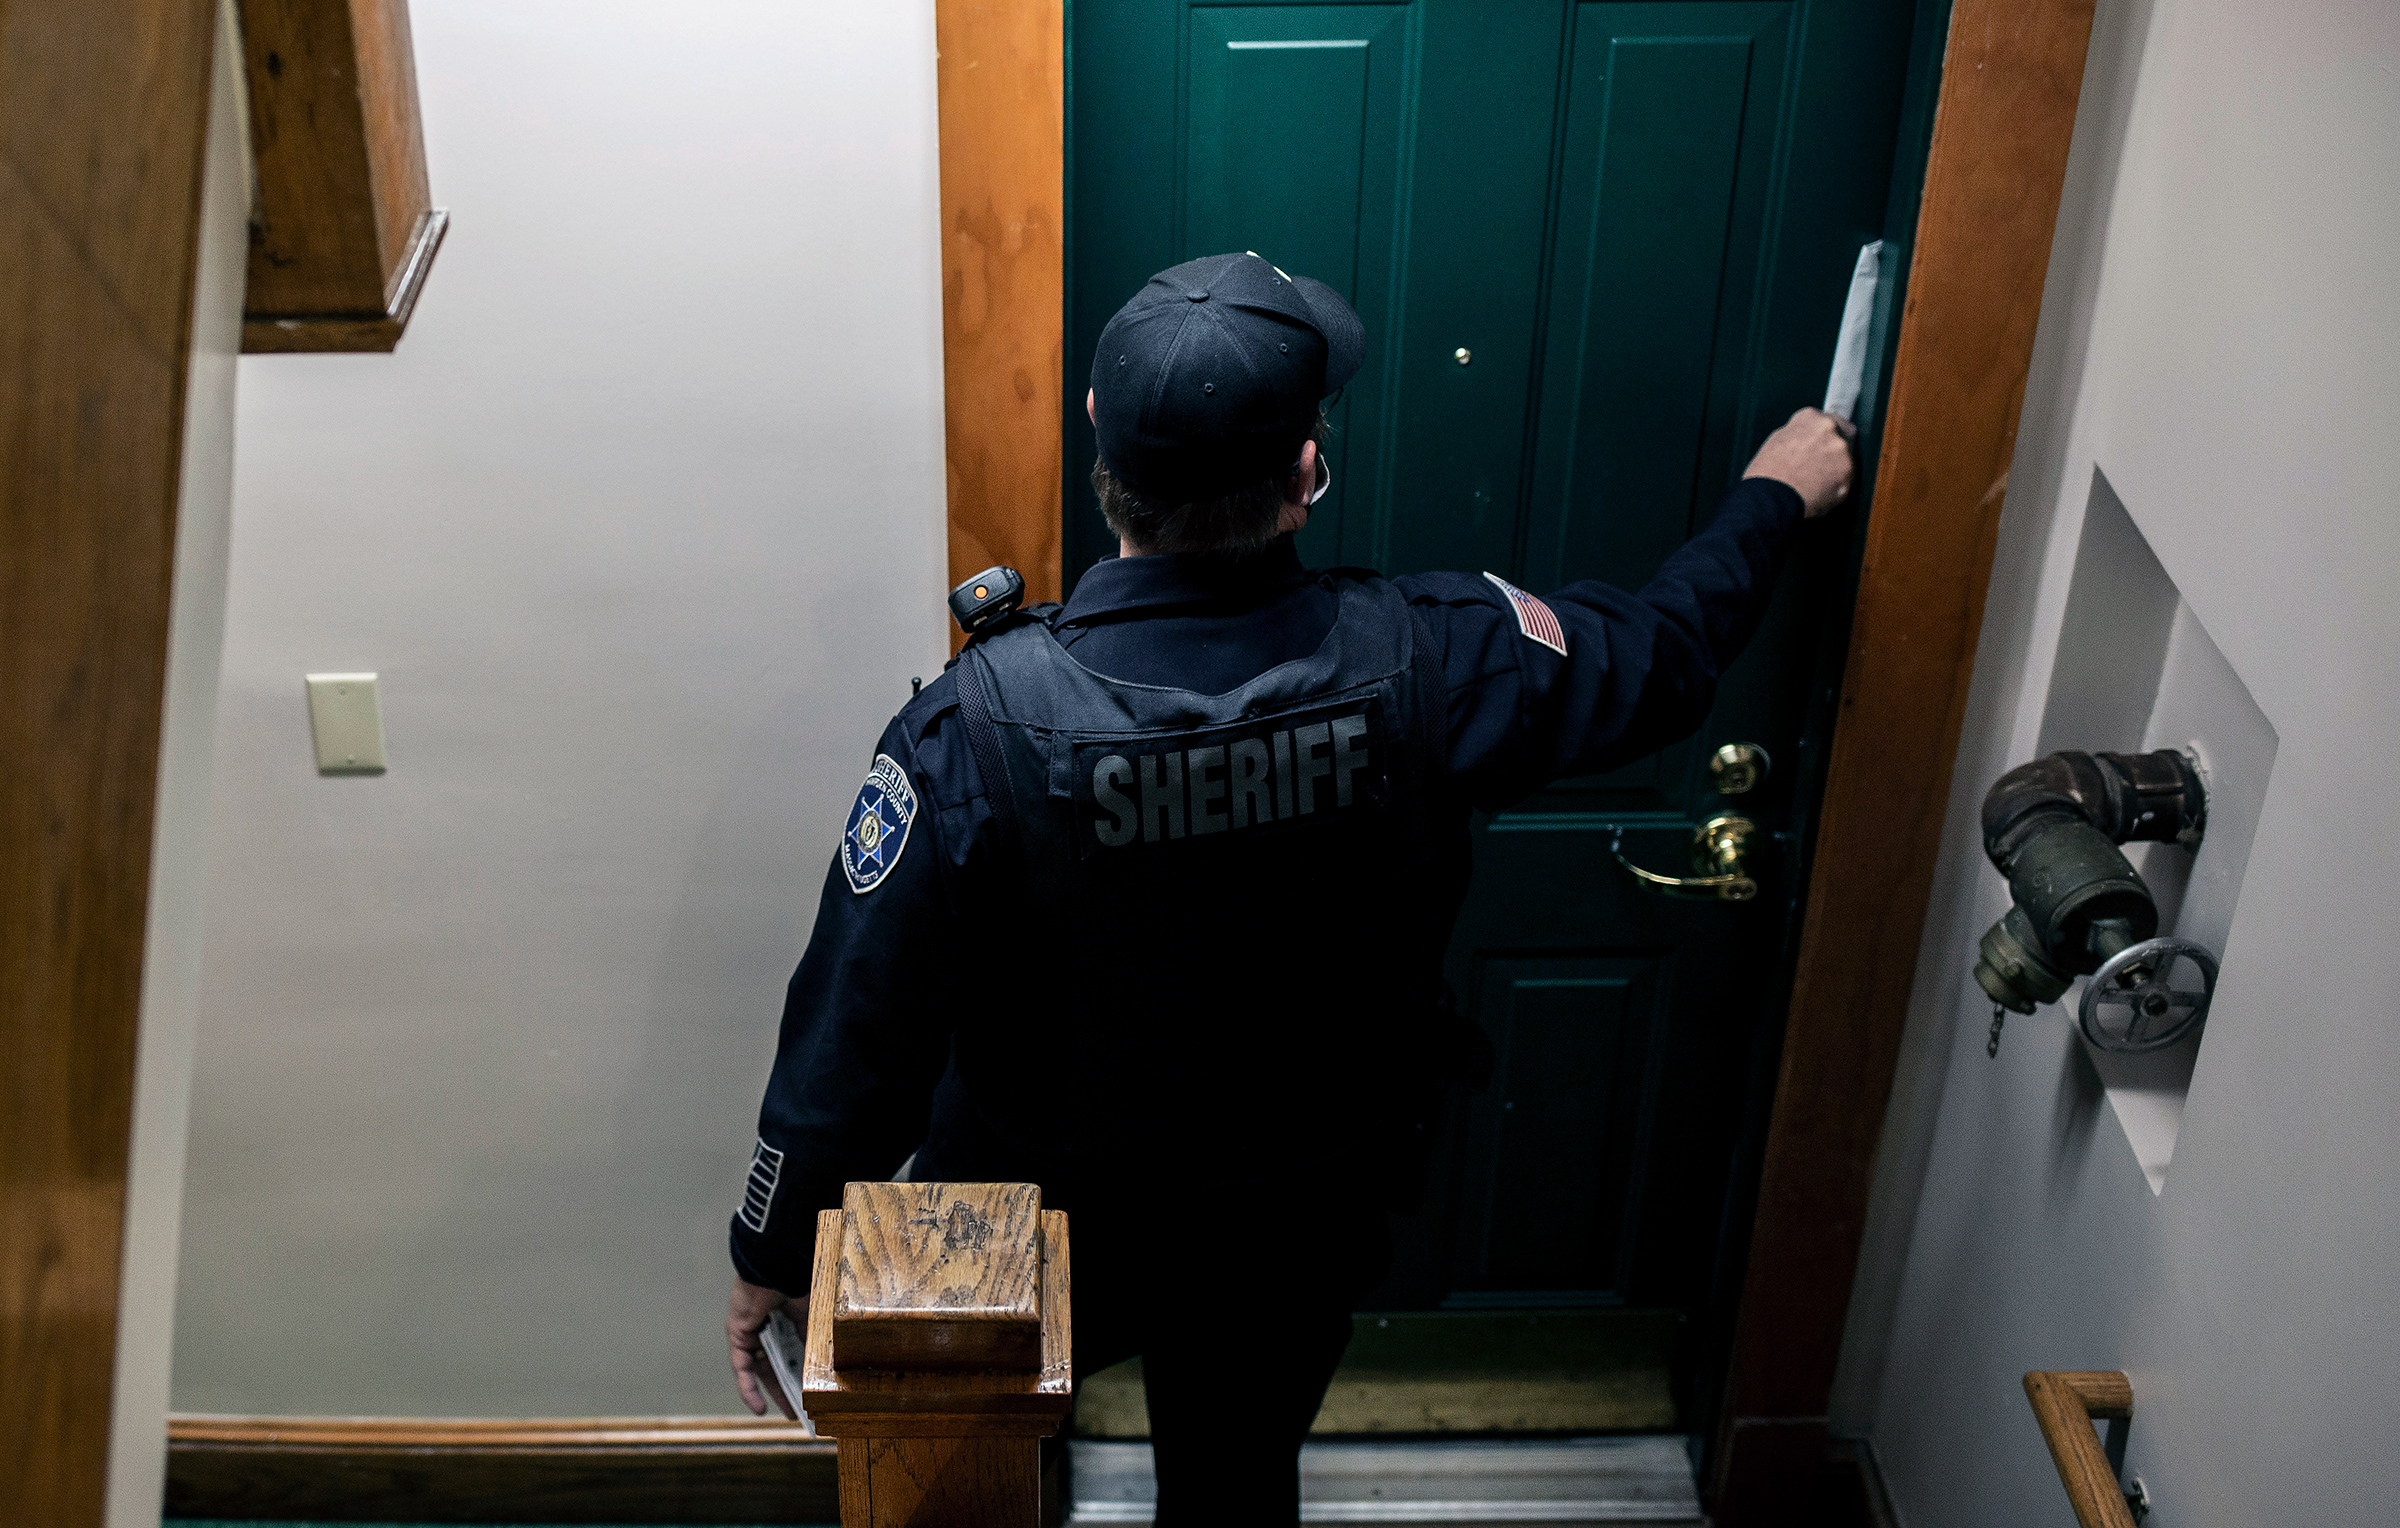 An eviction notice is placed in the doorway of an apartment in Springfield, Mass., on Dec. 16, 2020. A moratorium on evictions did little to address the bigger problem: The country is running out of affordable places for people to live. (Bryan Anselm—The New York Times/Redux)